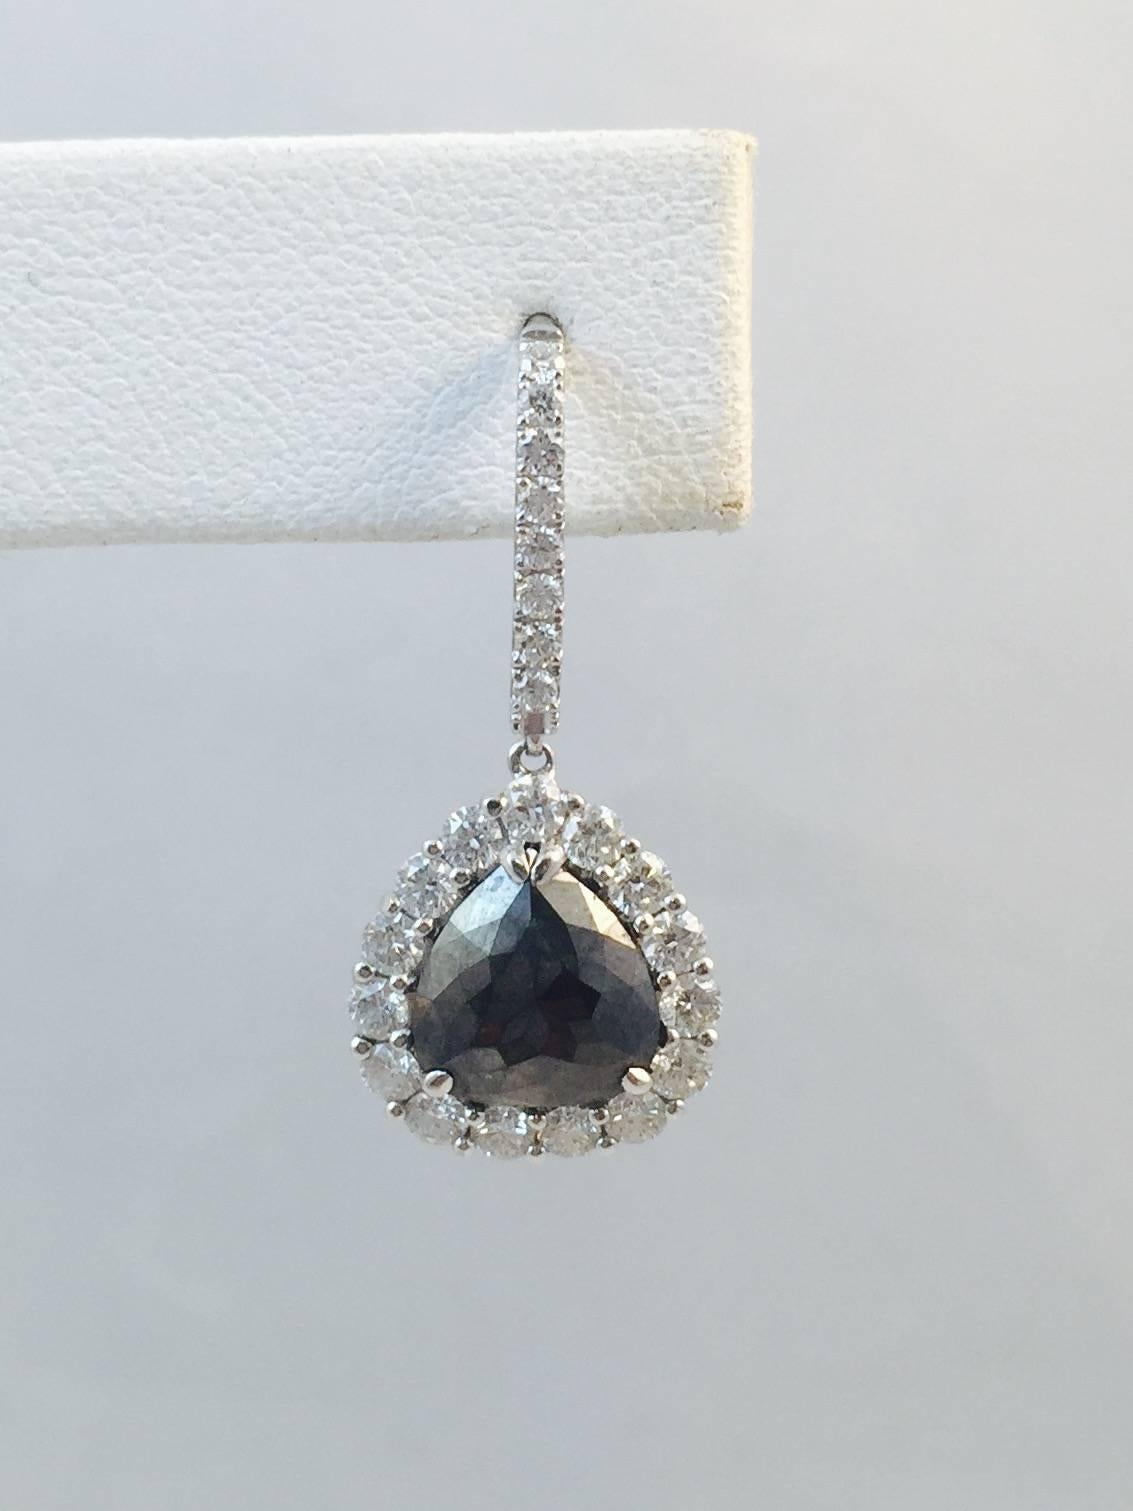 18 karat white gold is the platform for these stunning earrings.  Designed by Karina Brez, who uses very unusual stones in her creations, these Black Diamonds weigh 1.81 ct tw.  Continental backs are fronted with prong set brilliant cut White